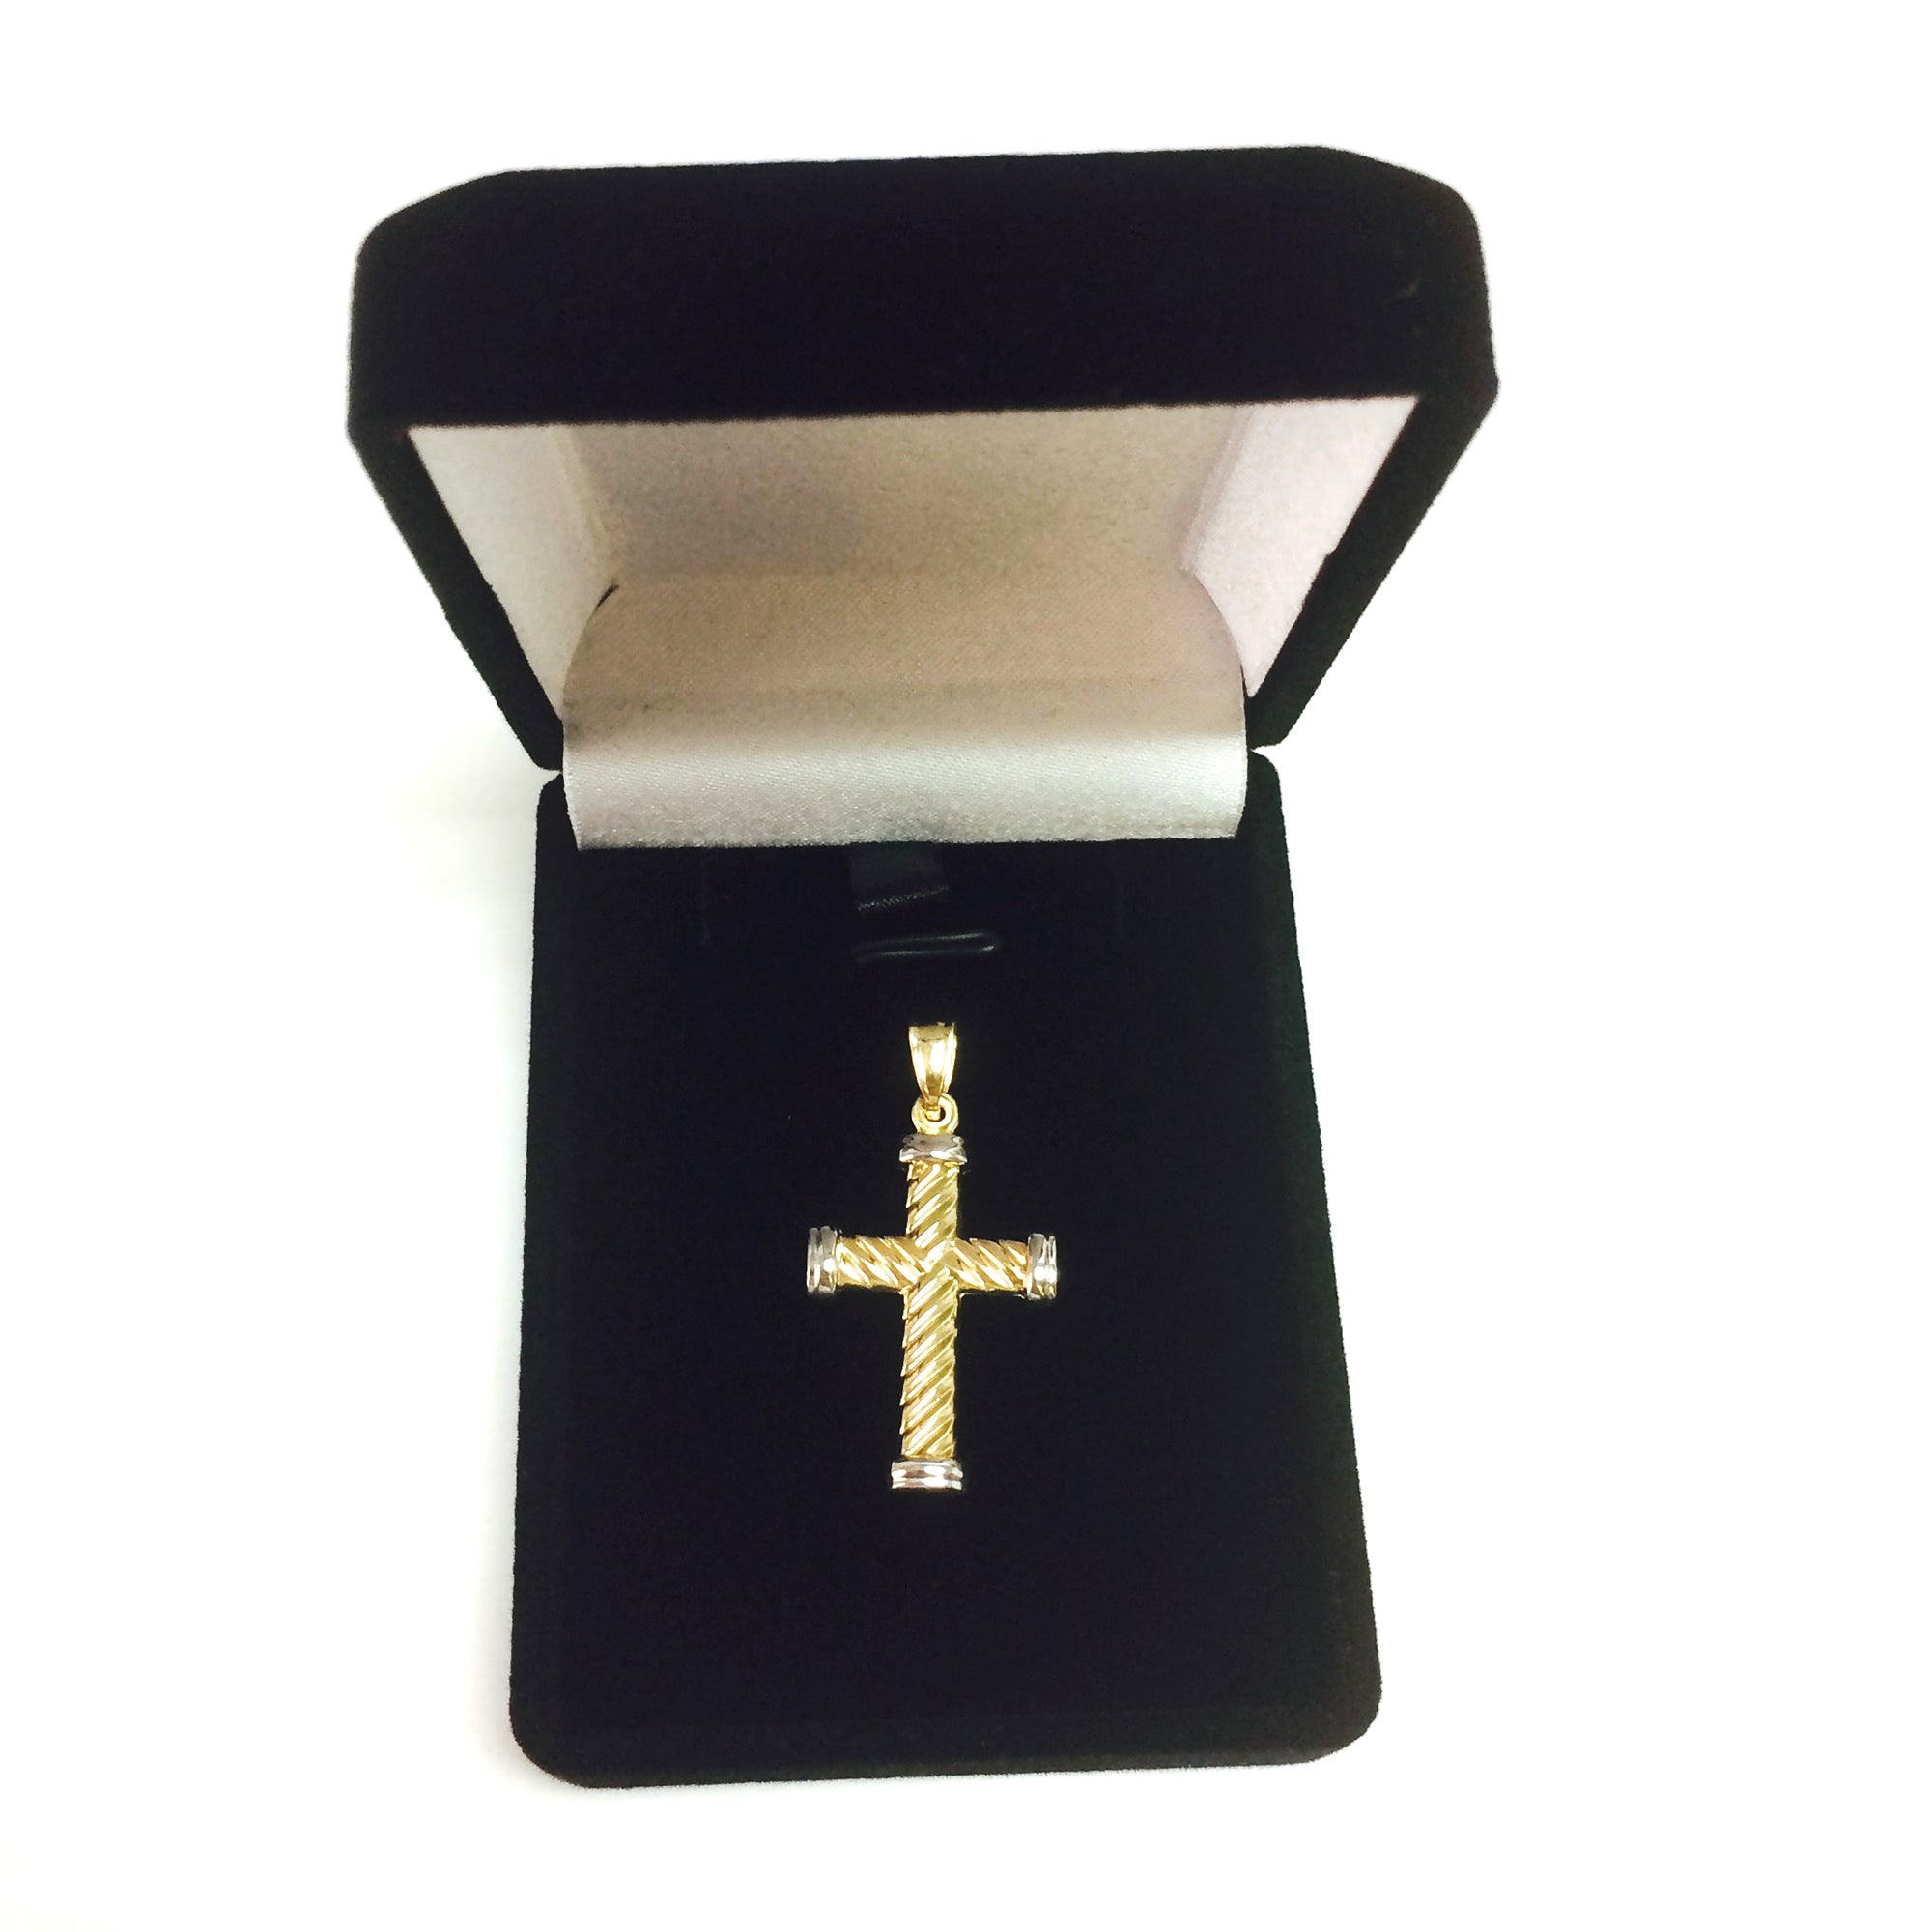 14k Yellow Gold Twisted Cable Cross Mens Pendant, 25 X 15 mm